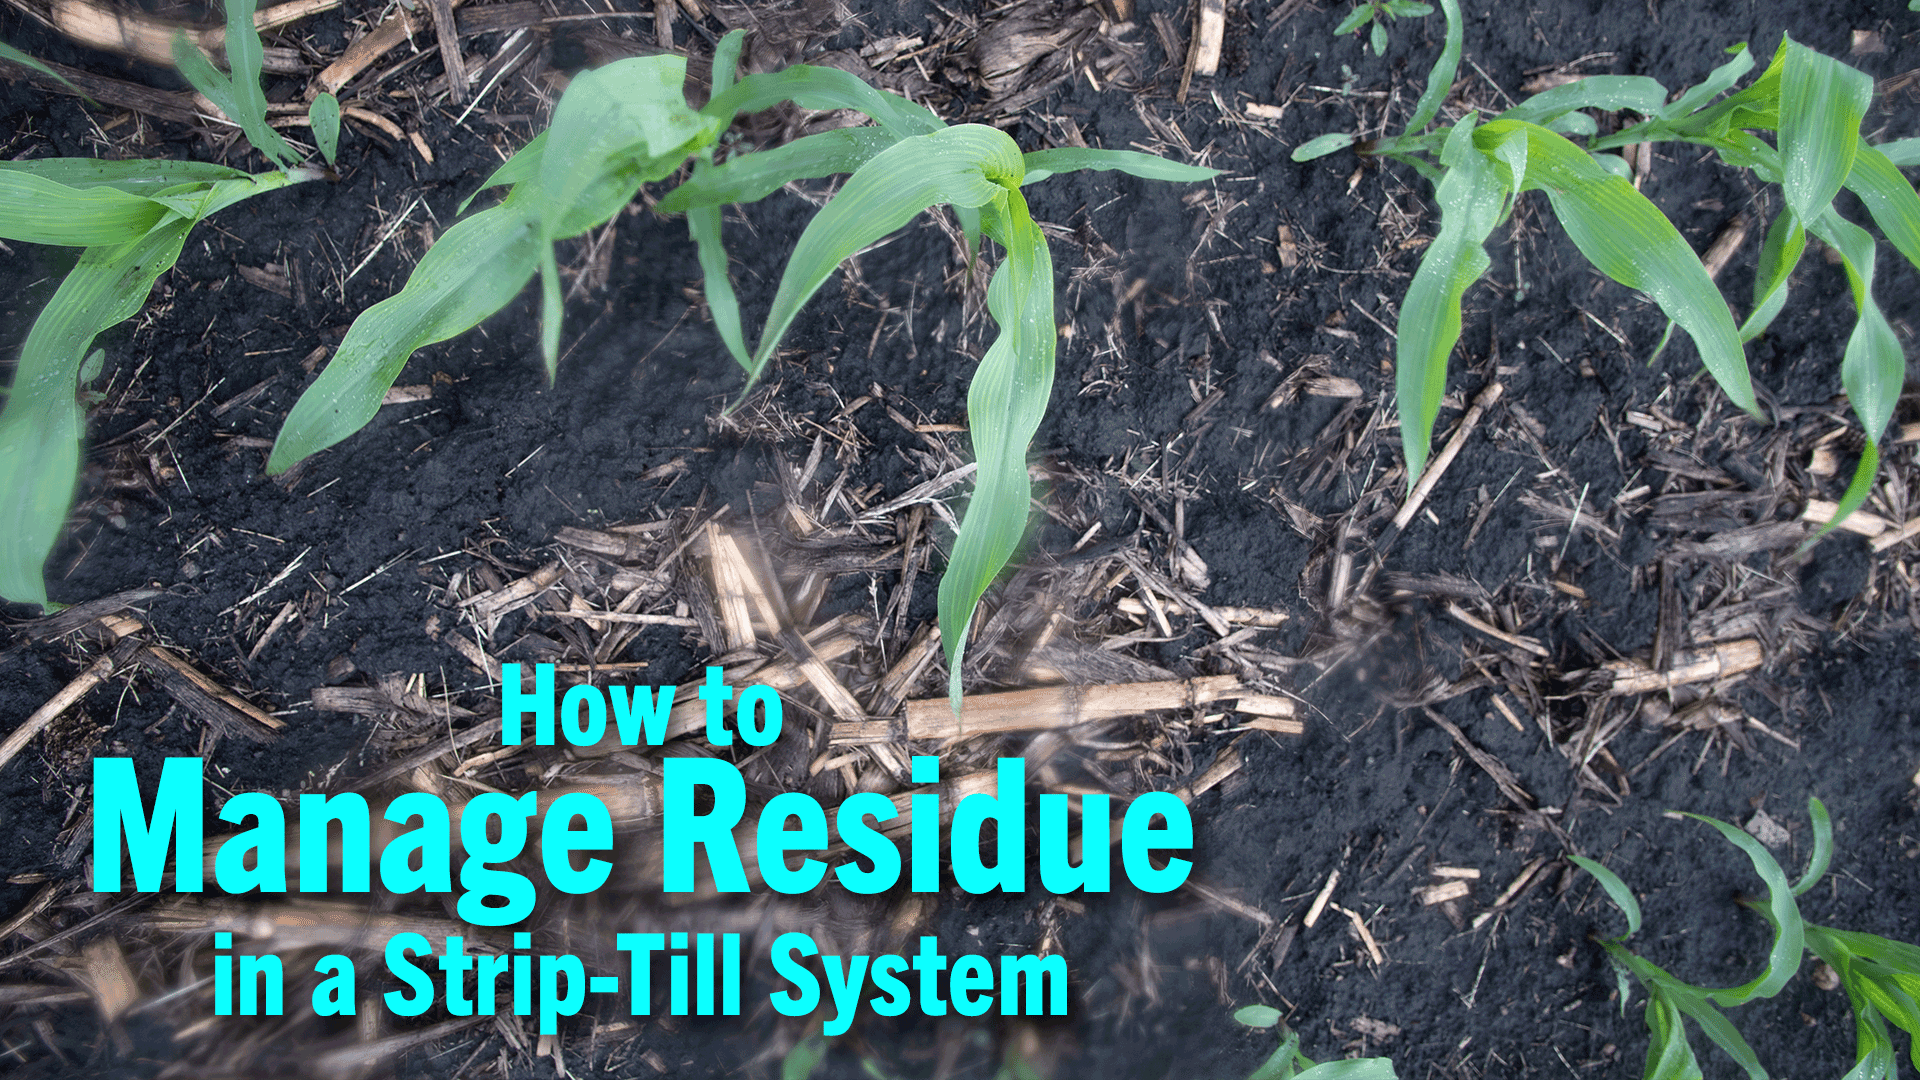 How-to-Manage-Residue-in-a-Strip-Till-System.png